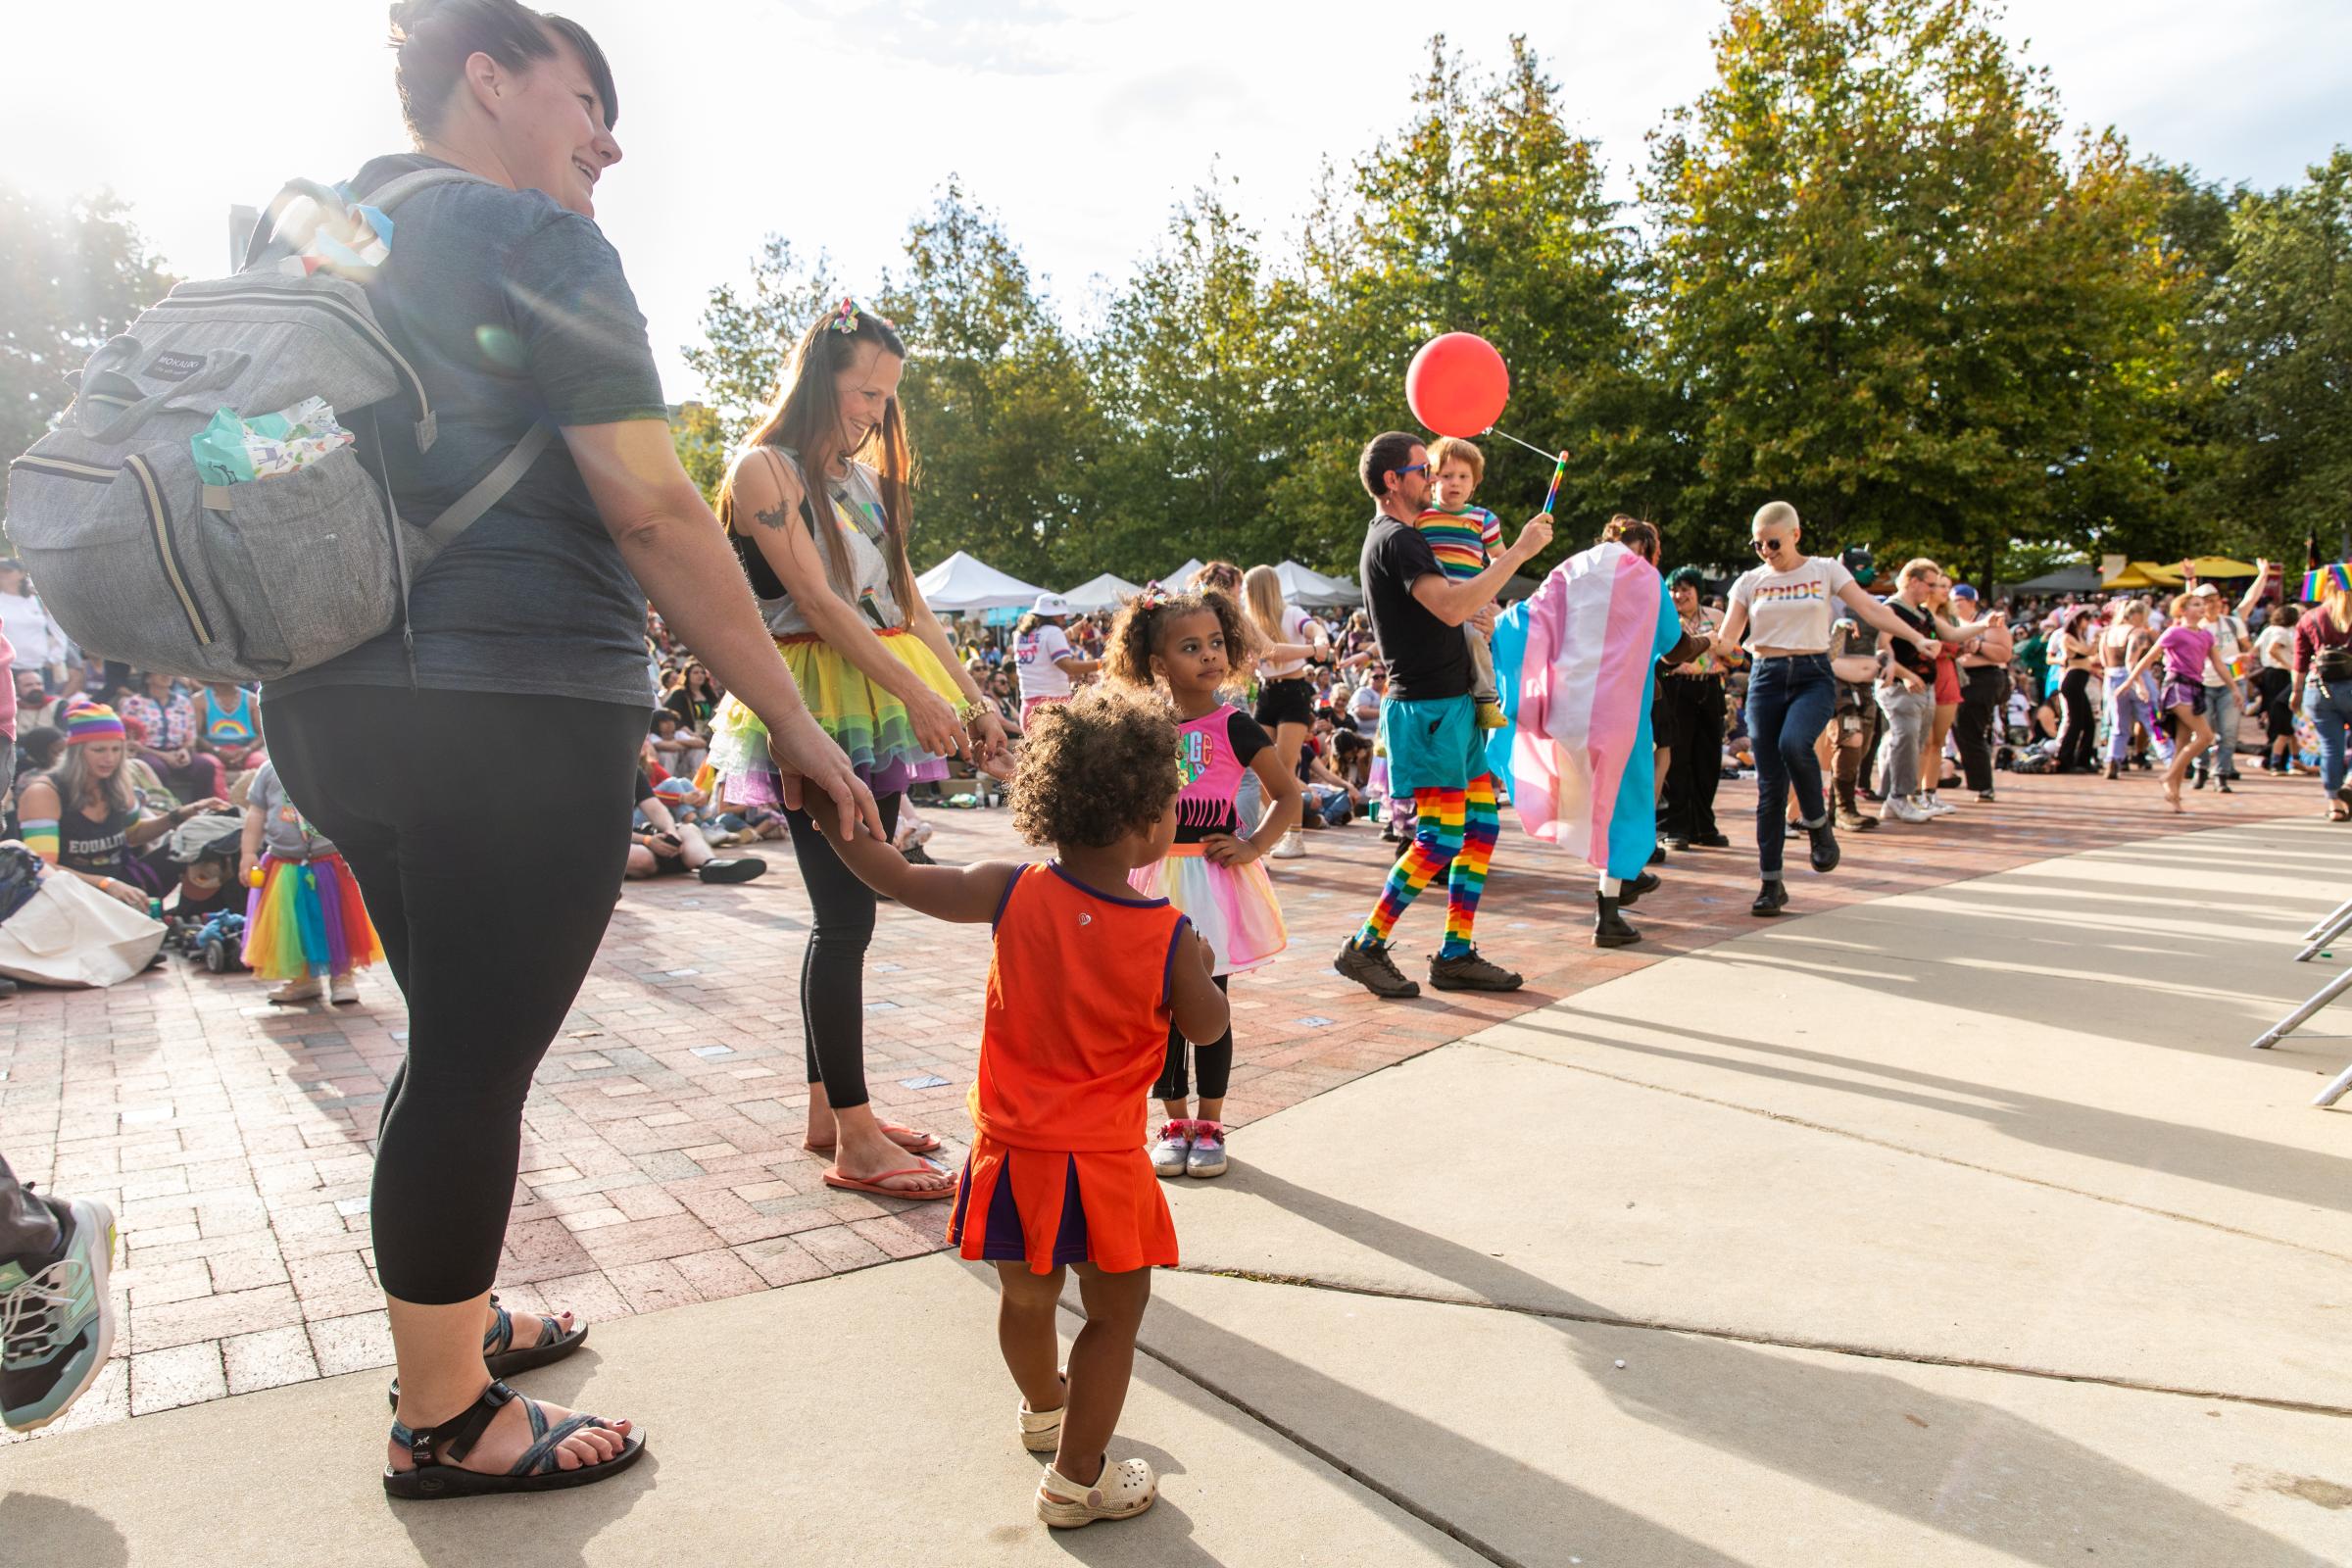 Blue Ridge Pride Festival 2022 - The festival welcomed LGBTQ families from Western North Carolina.